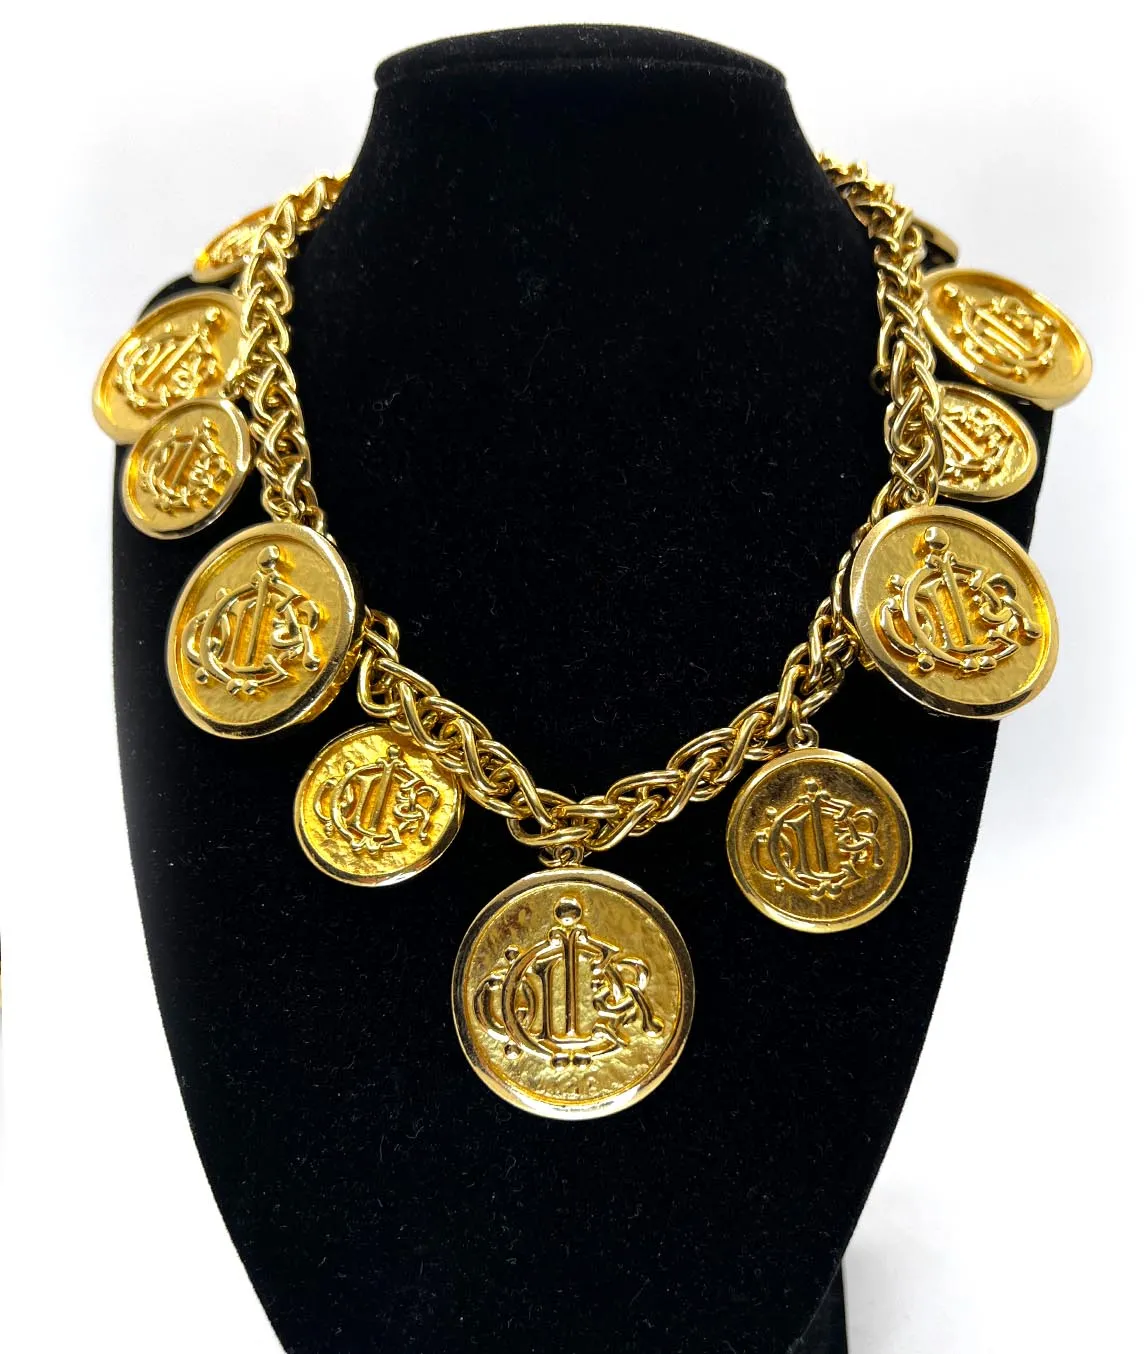 Gold plated heavy link chain with coin medallions showing Christian Dior logo on a black display